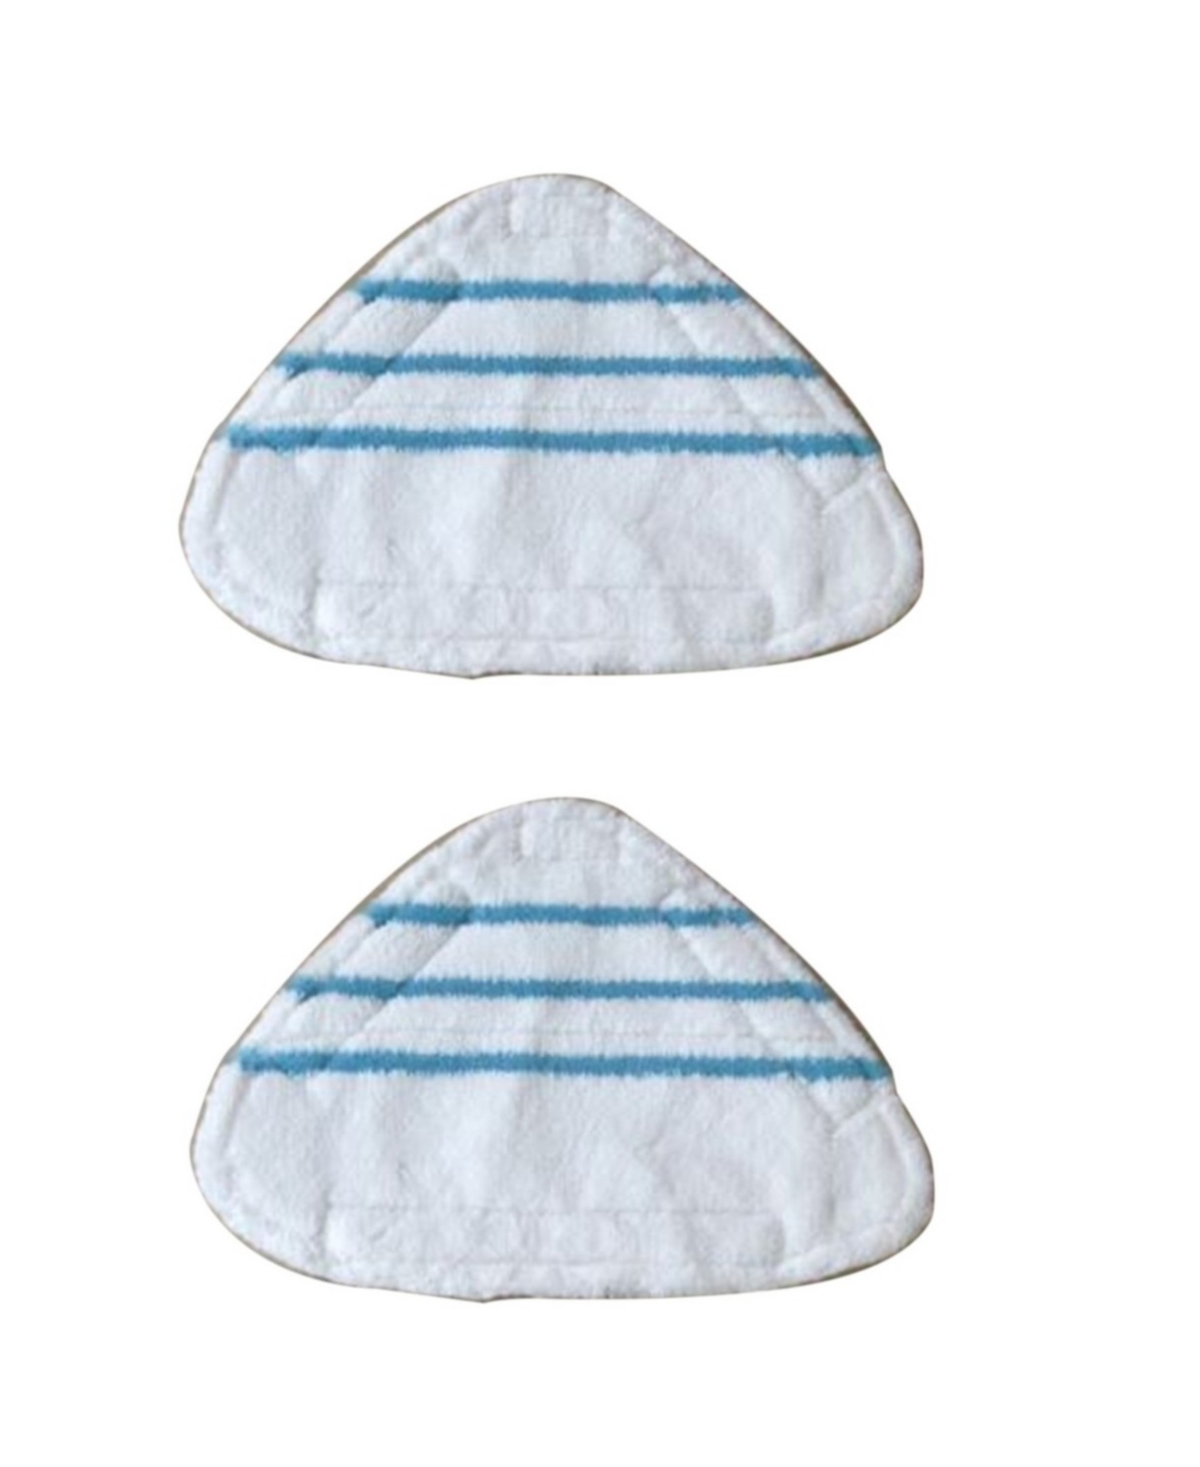 2-piece Mop Pad Replacement for Stm-500 Steam Mop and Stm-700 Steam Mop and Handheld Steamer - White